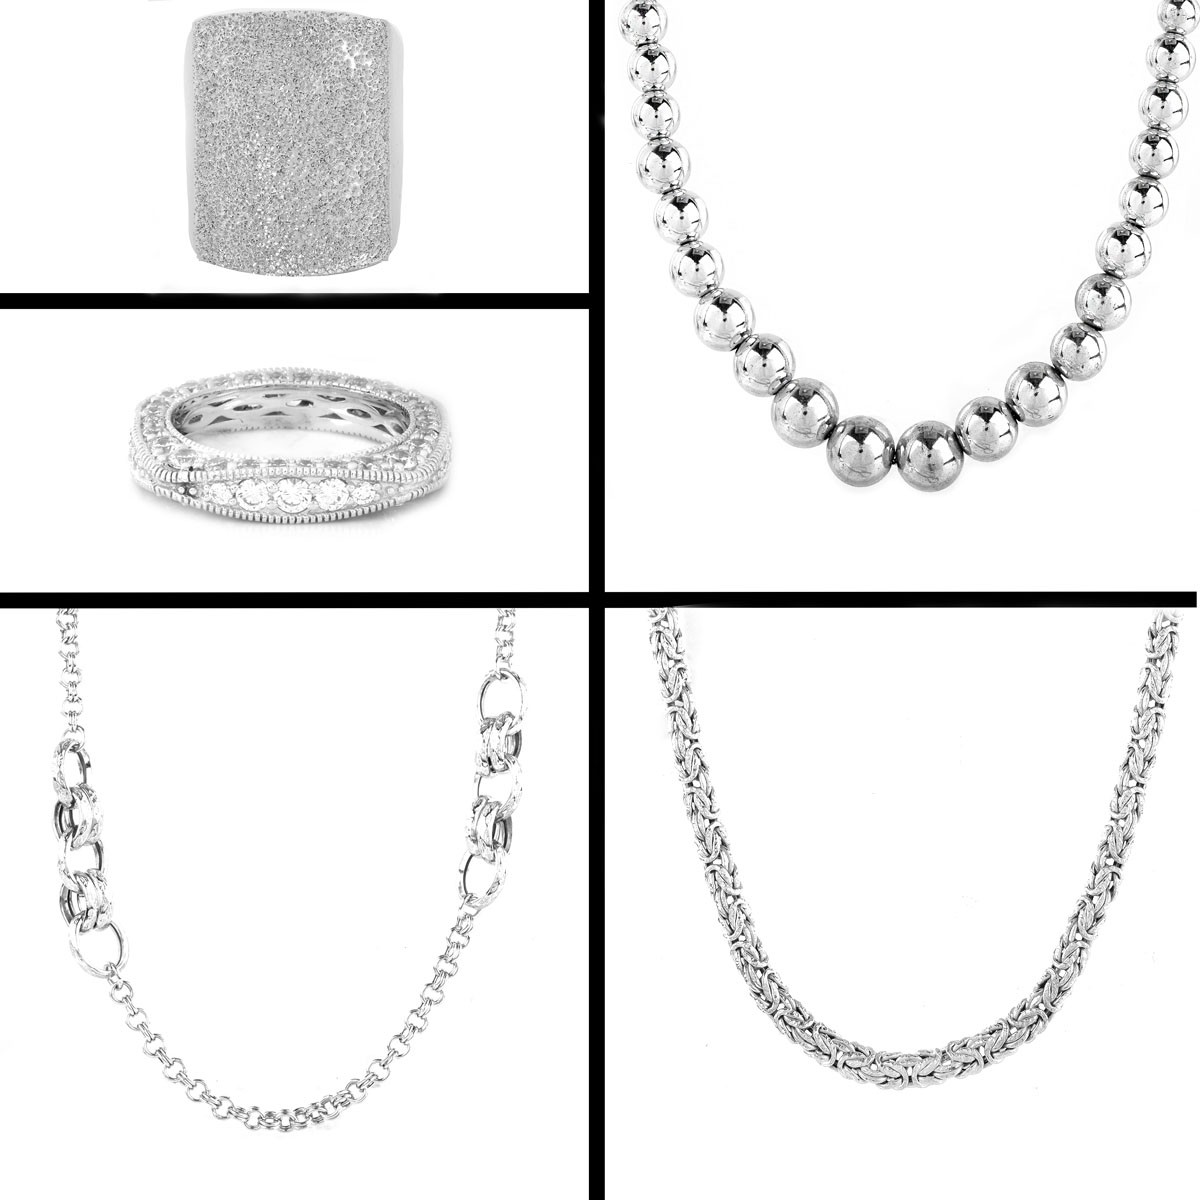 Five Piece Sterling Silver Fashion Jewelry